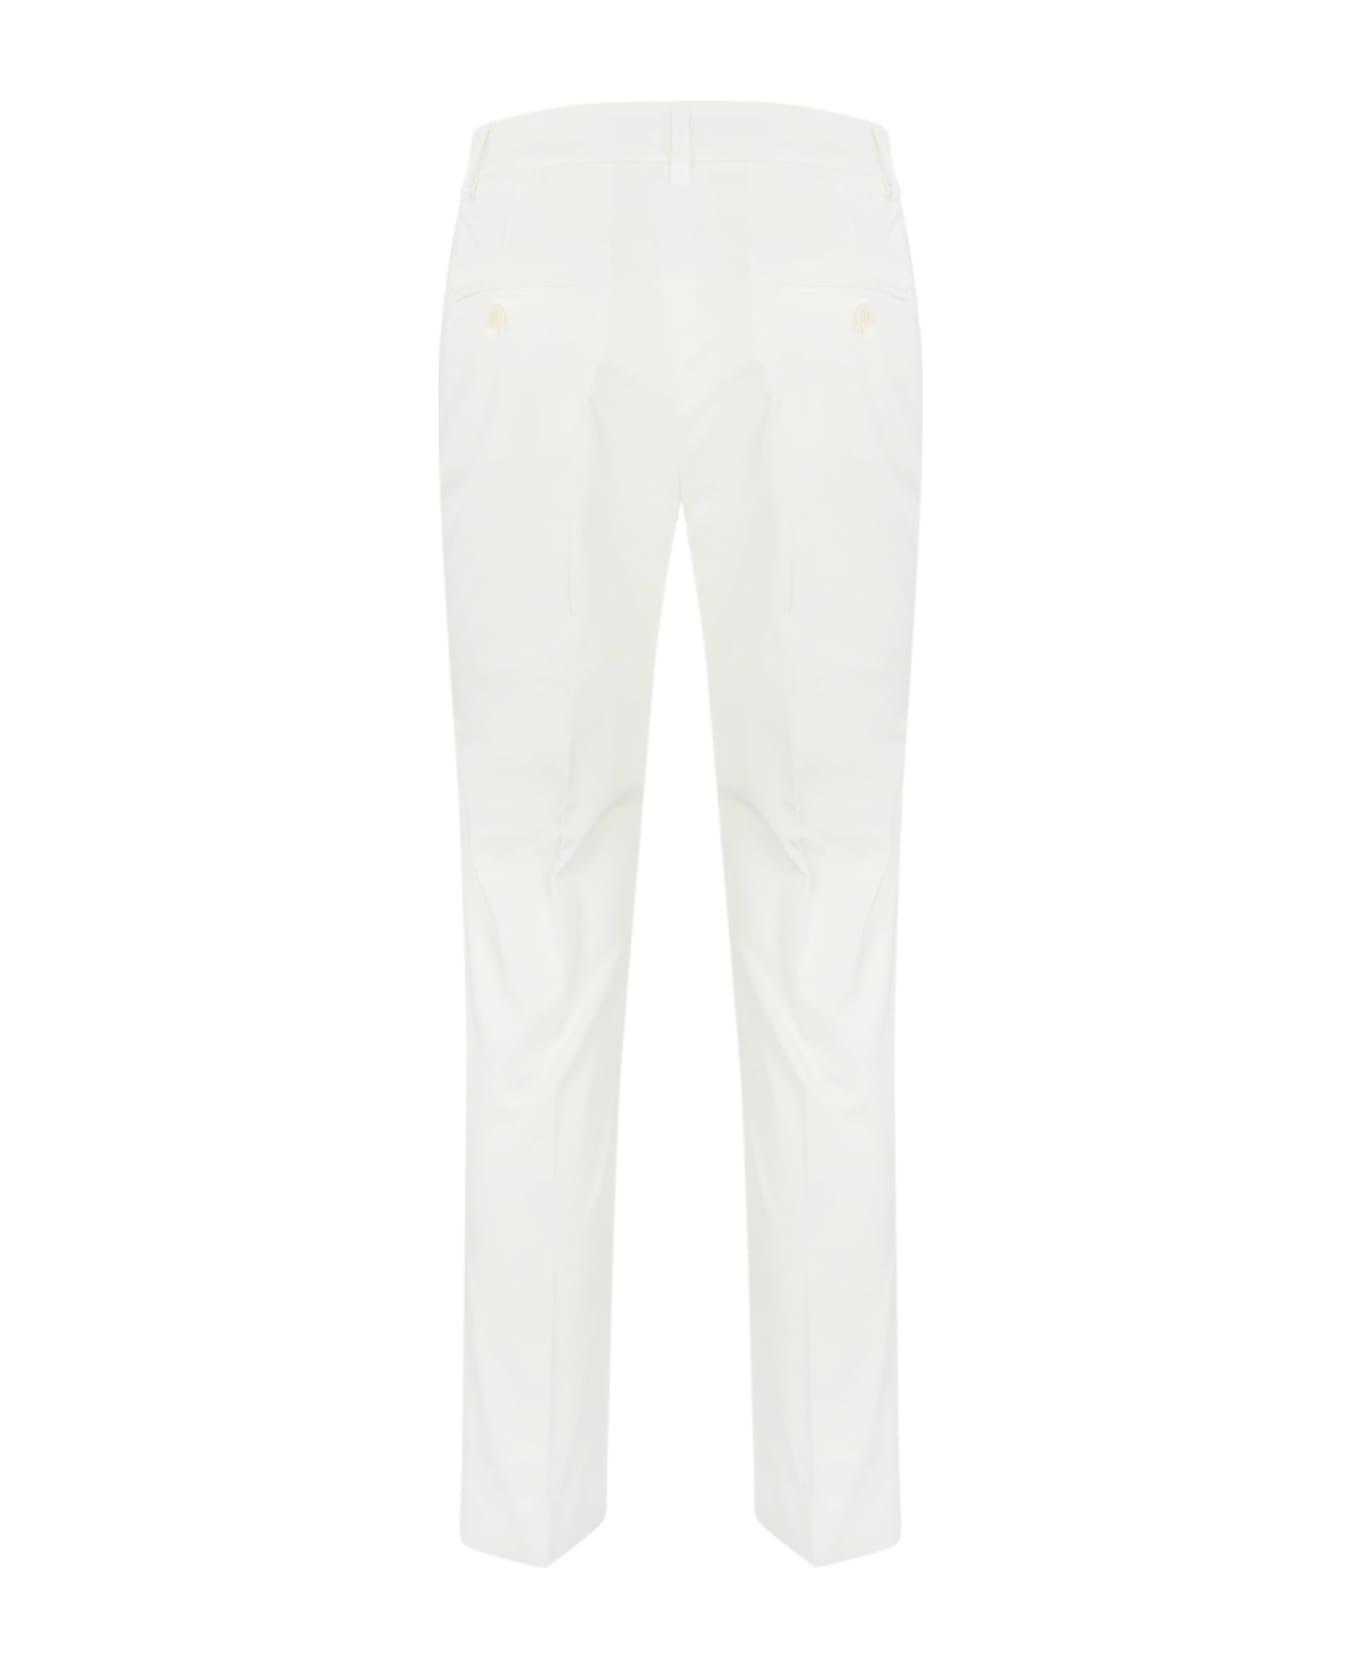 Weekend Max Mara "cecco" Stretch Cotton Trousers - OFF WHITE